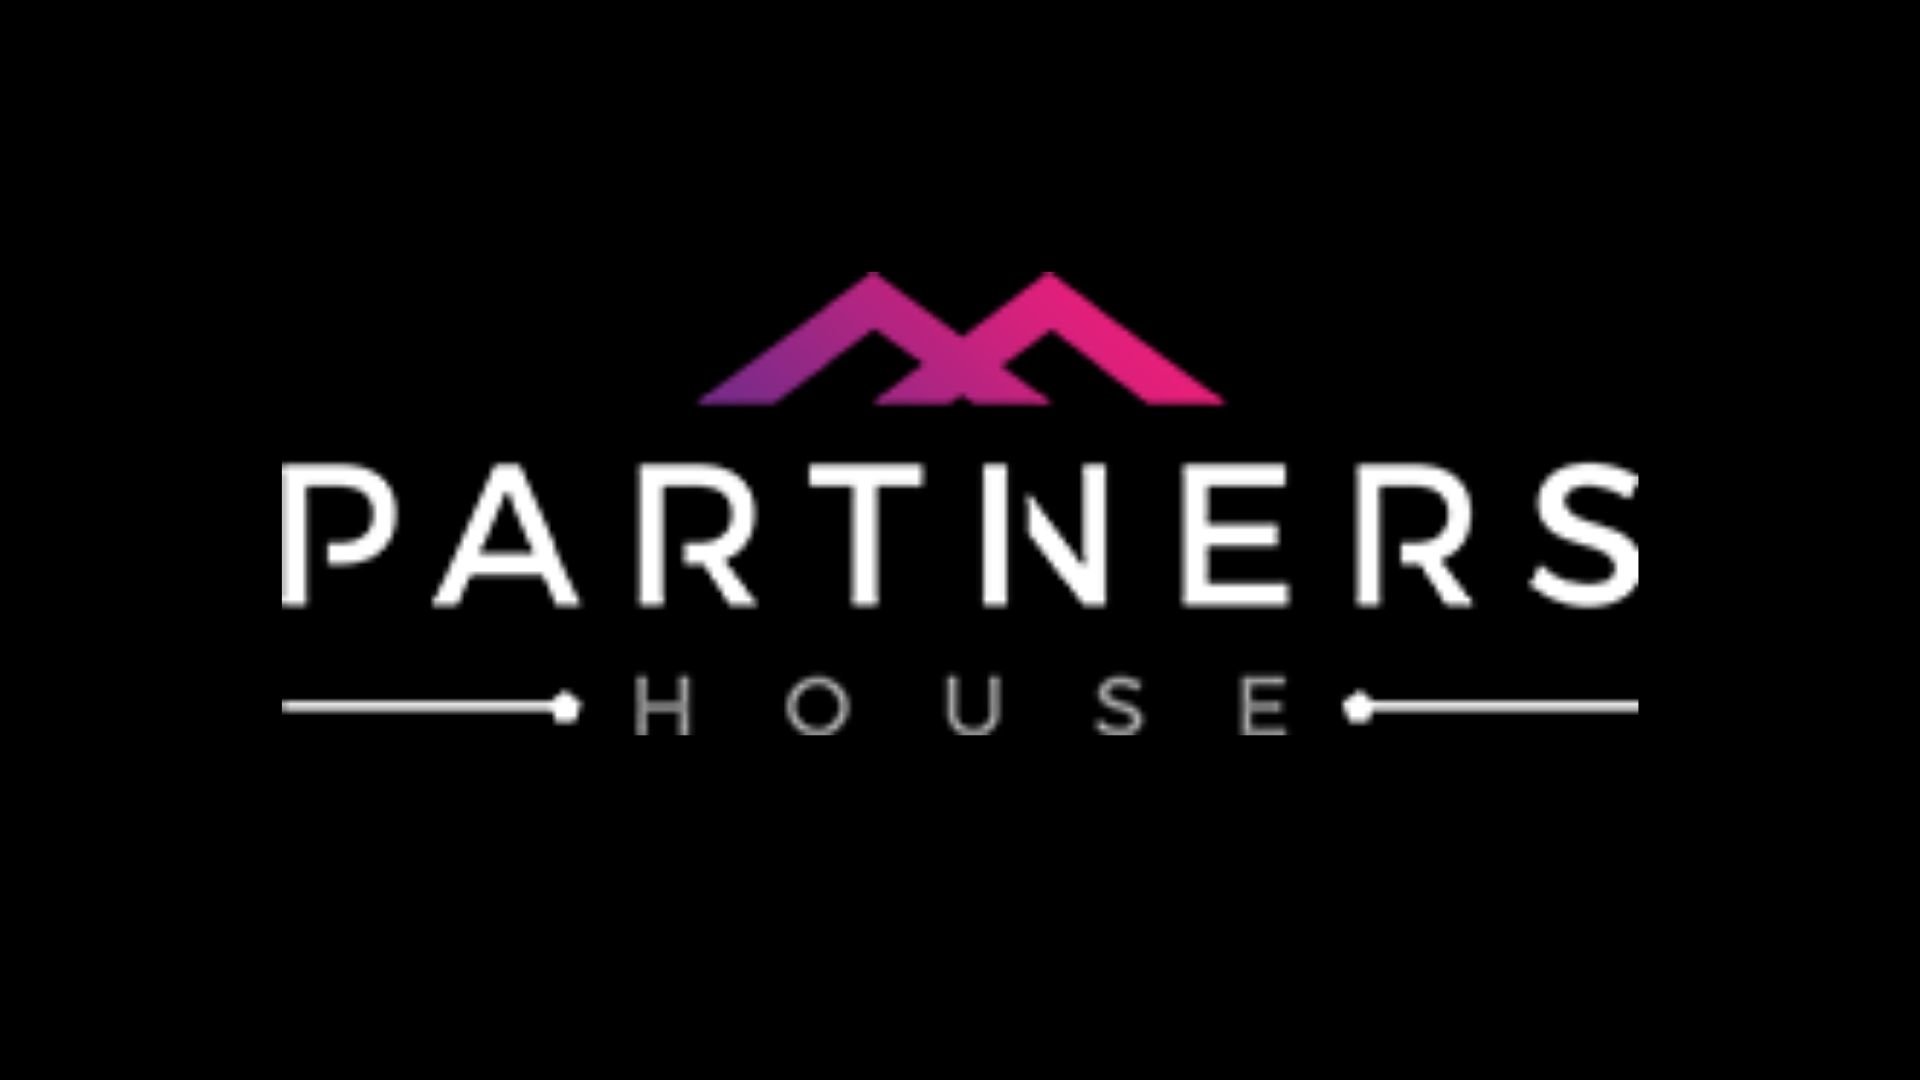 Partners house review